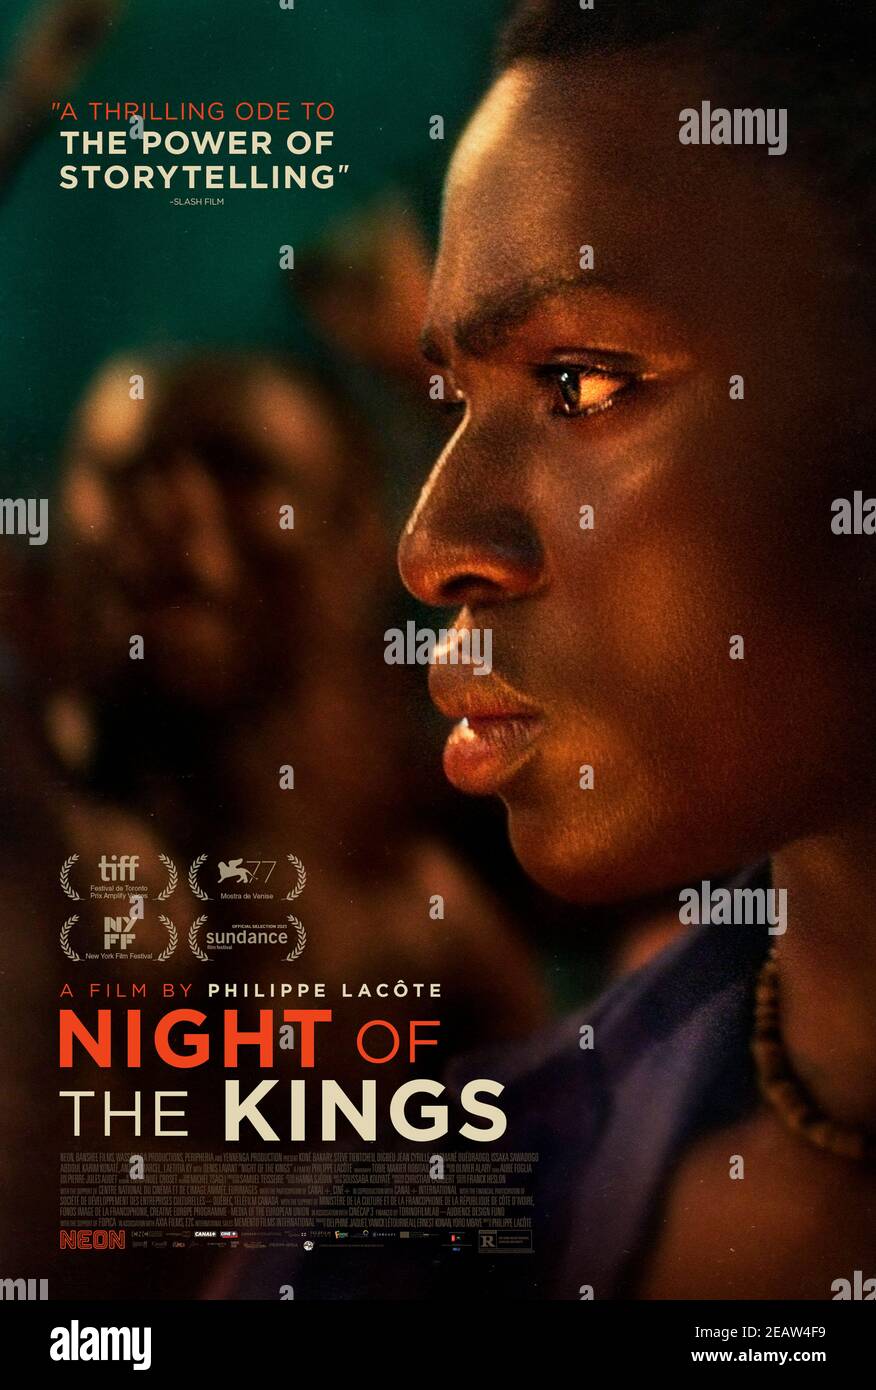 Night of the Kings [La nuit des roi] (2020) directed by Philippe Lacôte and starring Bakary Koné, Steve Tientcheu and Jean Cyrille Digbe. A newly arrived prisoner must tell a story to the other prisoners. Stock Photo